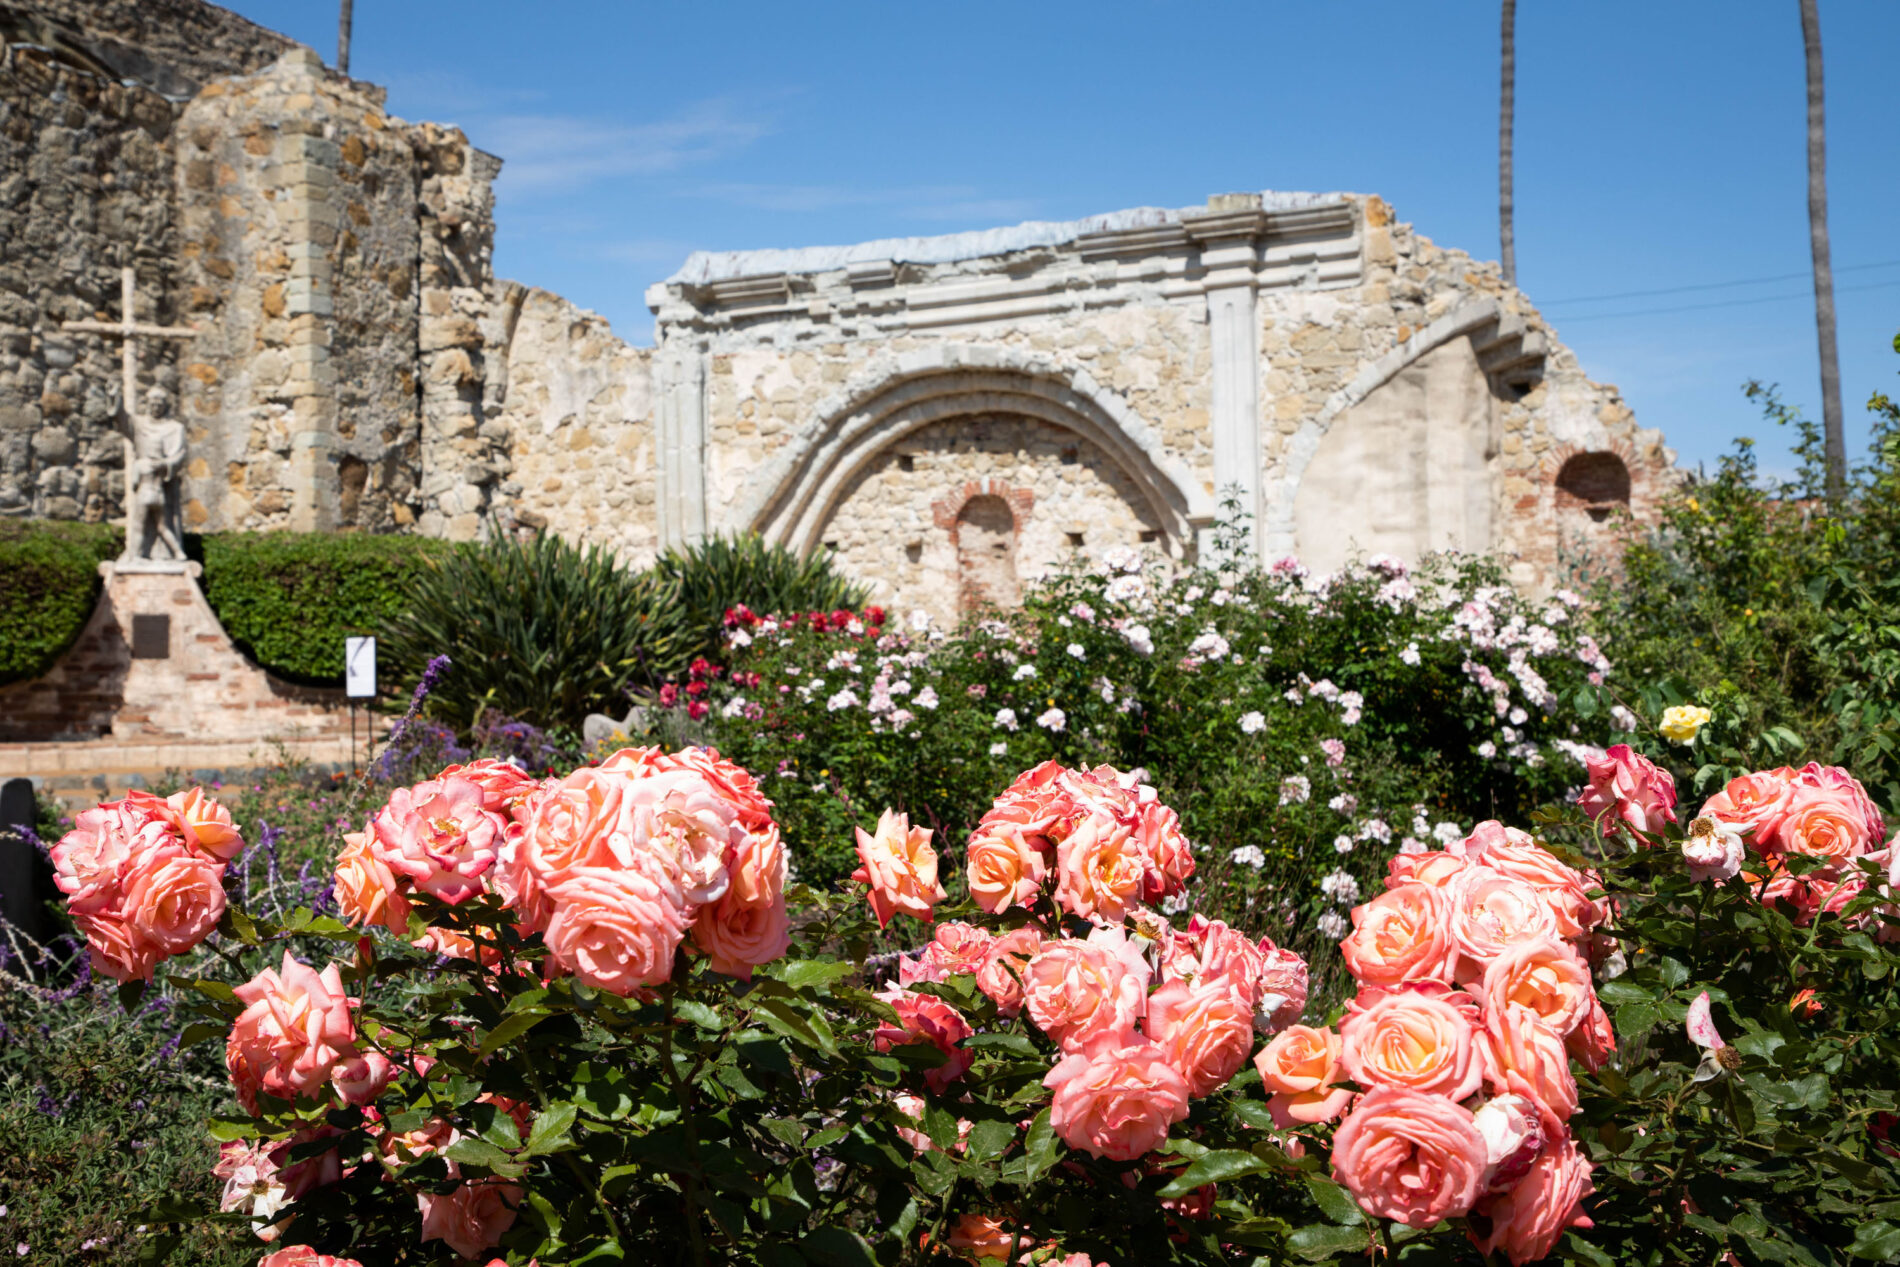 Make sure to add the Mission San Juan Capistrano to your PCH itinerary.